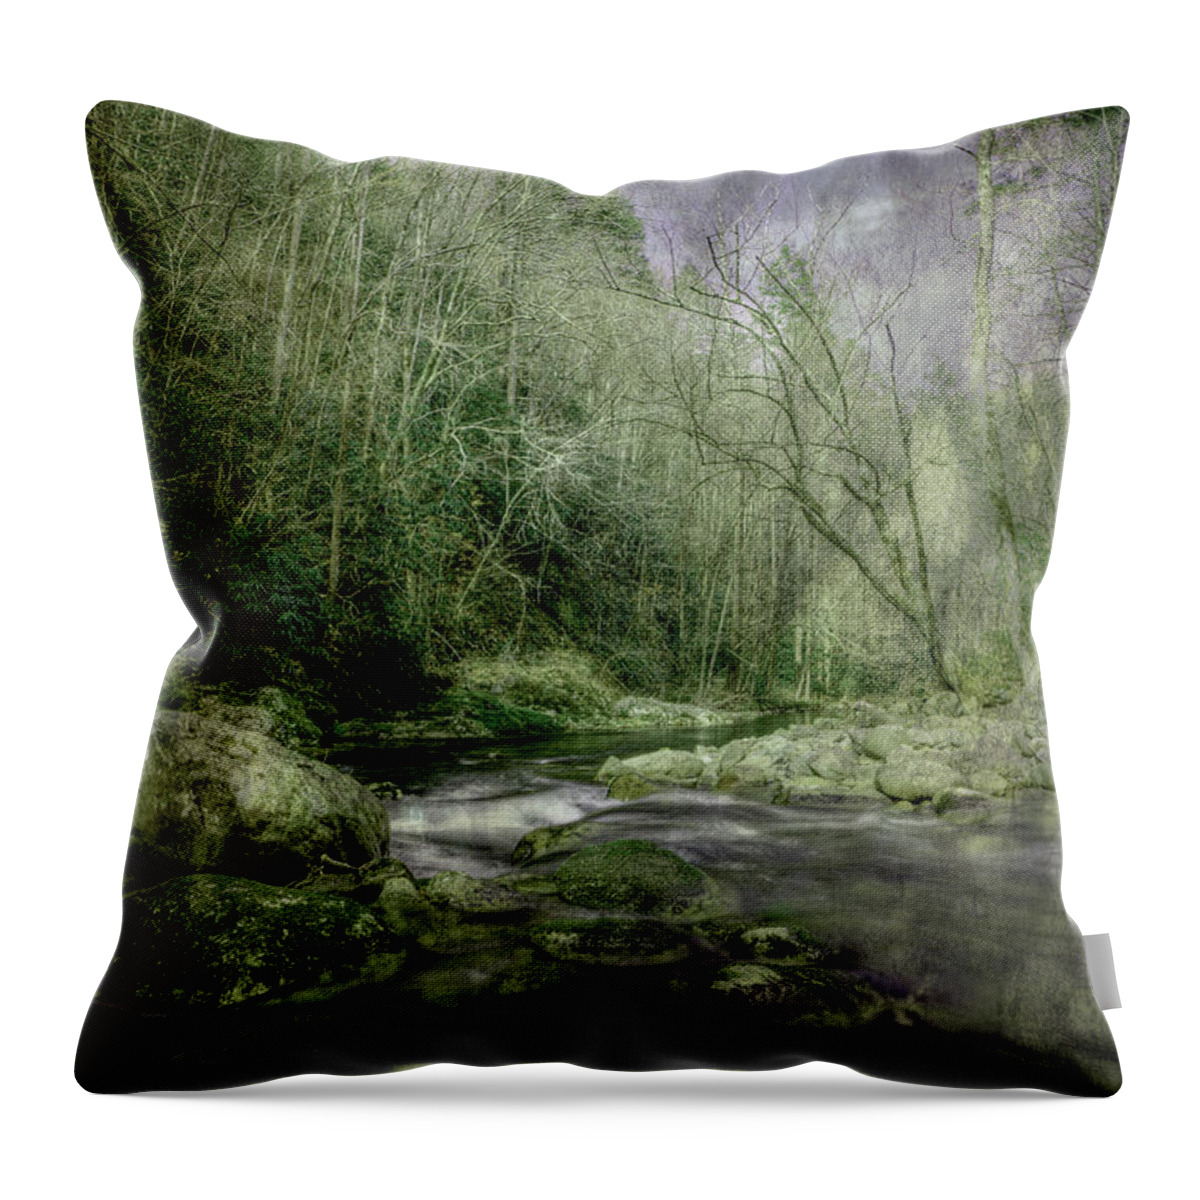 Smoky Mountain Stream Throw Pillow featuring the photograph I Never Want It To End by Mike Eingle